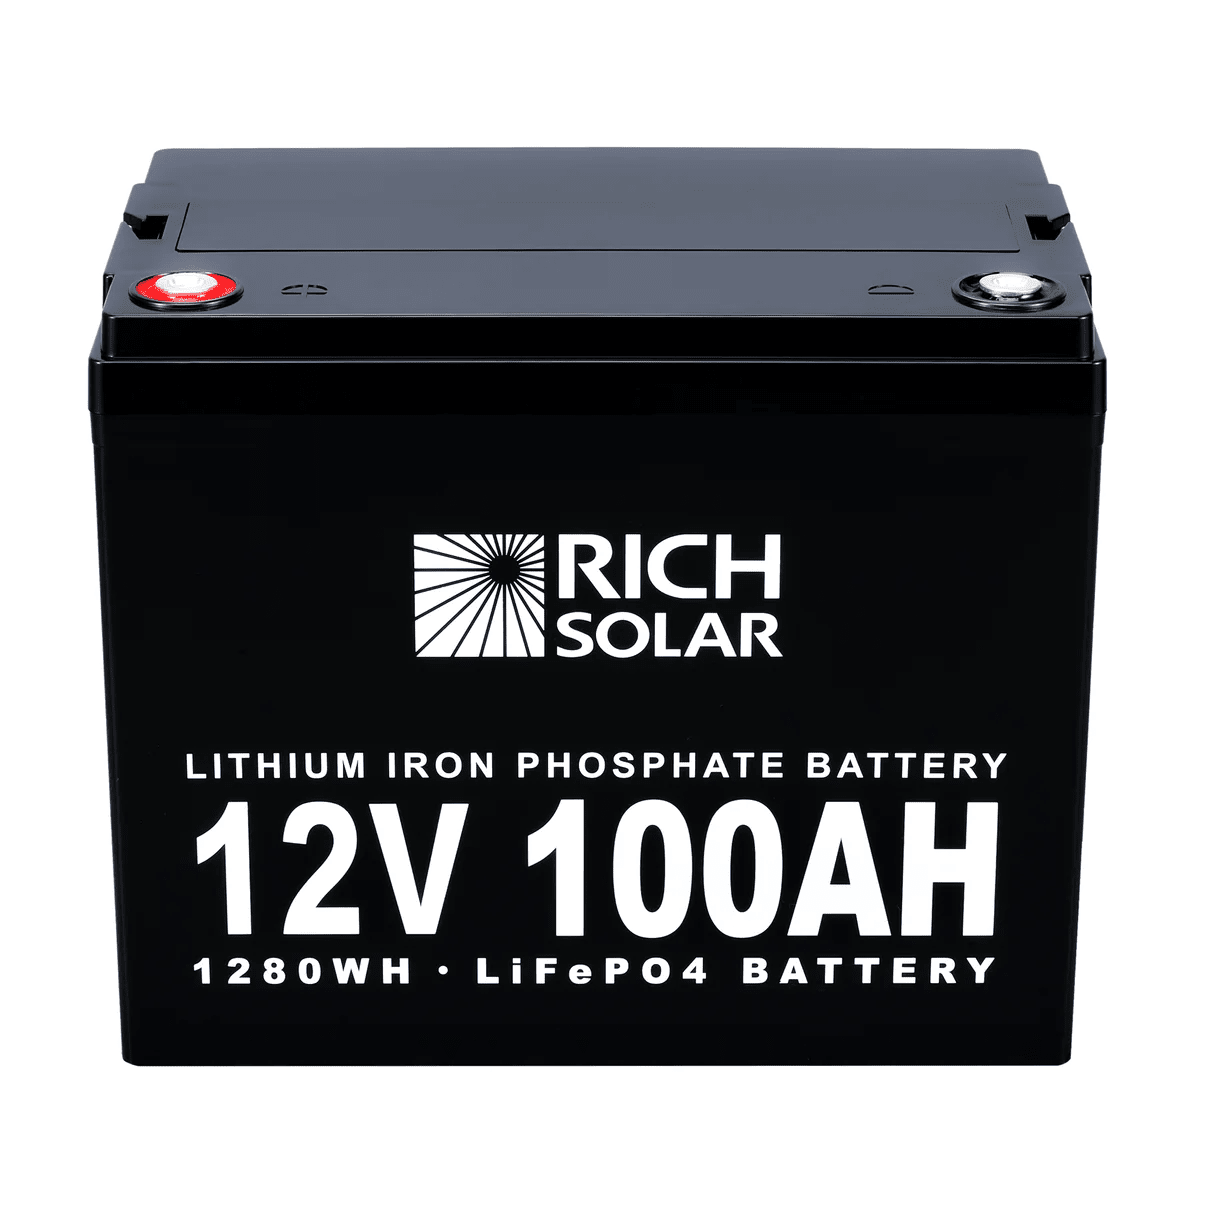 12V 100Ah Lithium Iron (LiFePO4) Battery with Bluetooth 5.0-FAST